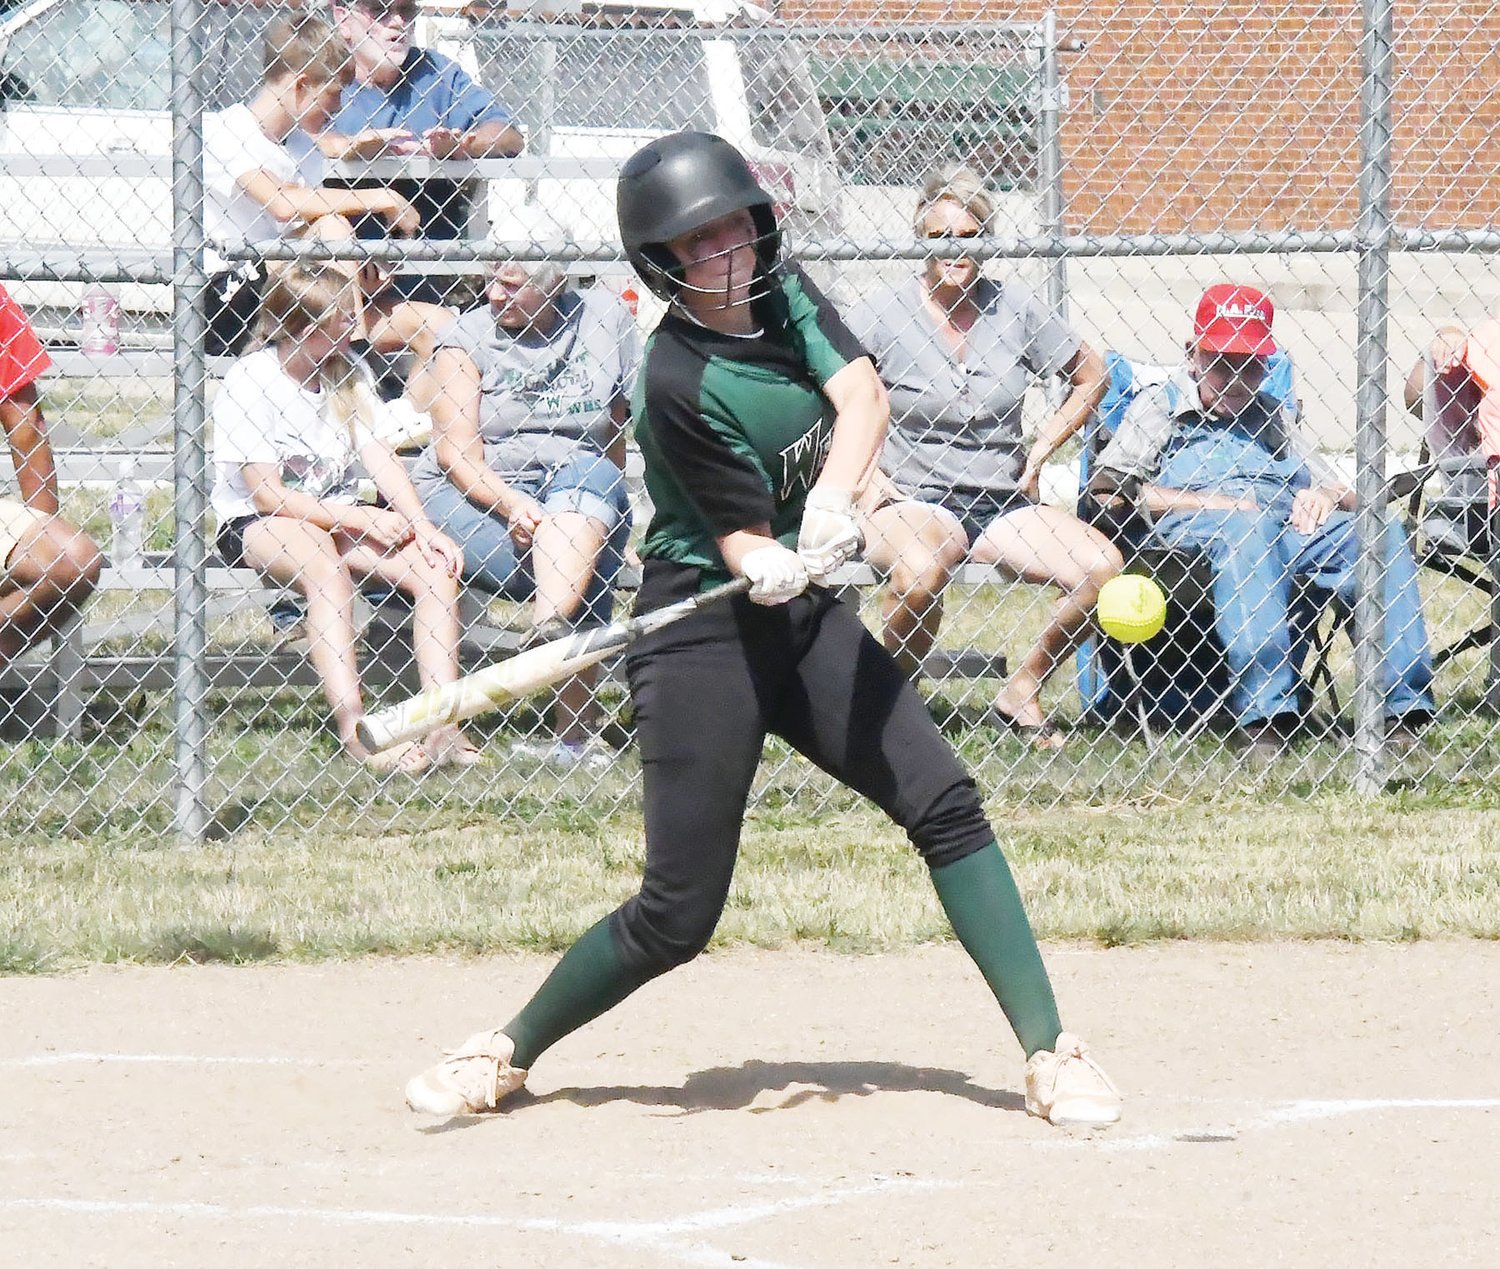 Westran’s Kharigan Fuemmeler makes great contact with the ball during the Hornets’ green-and-white scrimmage on Saturday morning at Kelly Odneal Field. Fuemmeler smacked a home run to left field on this play, the only dinger of the scrimmage for either team.